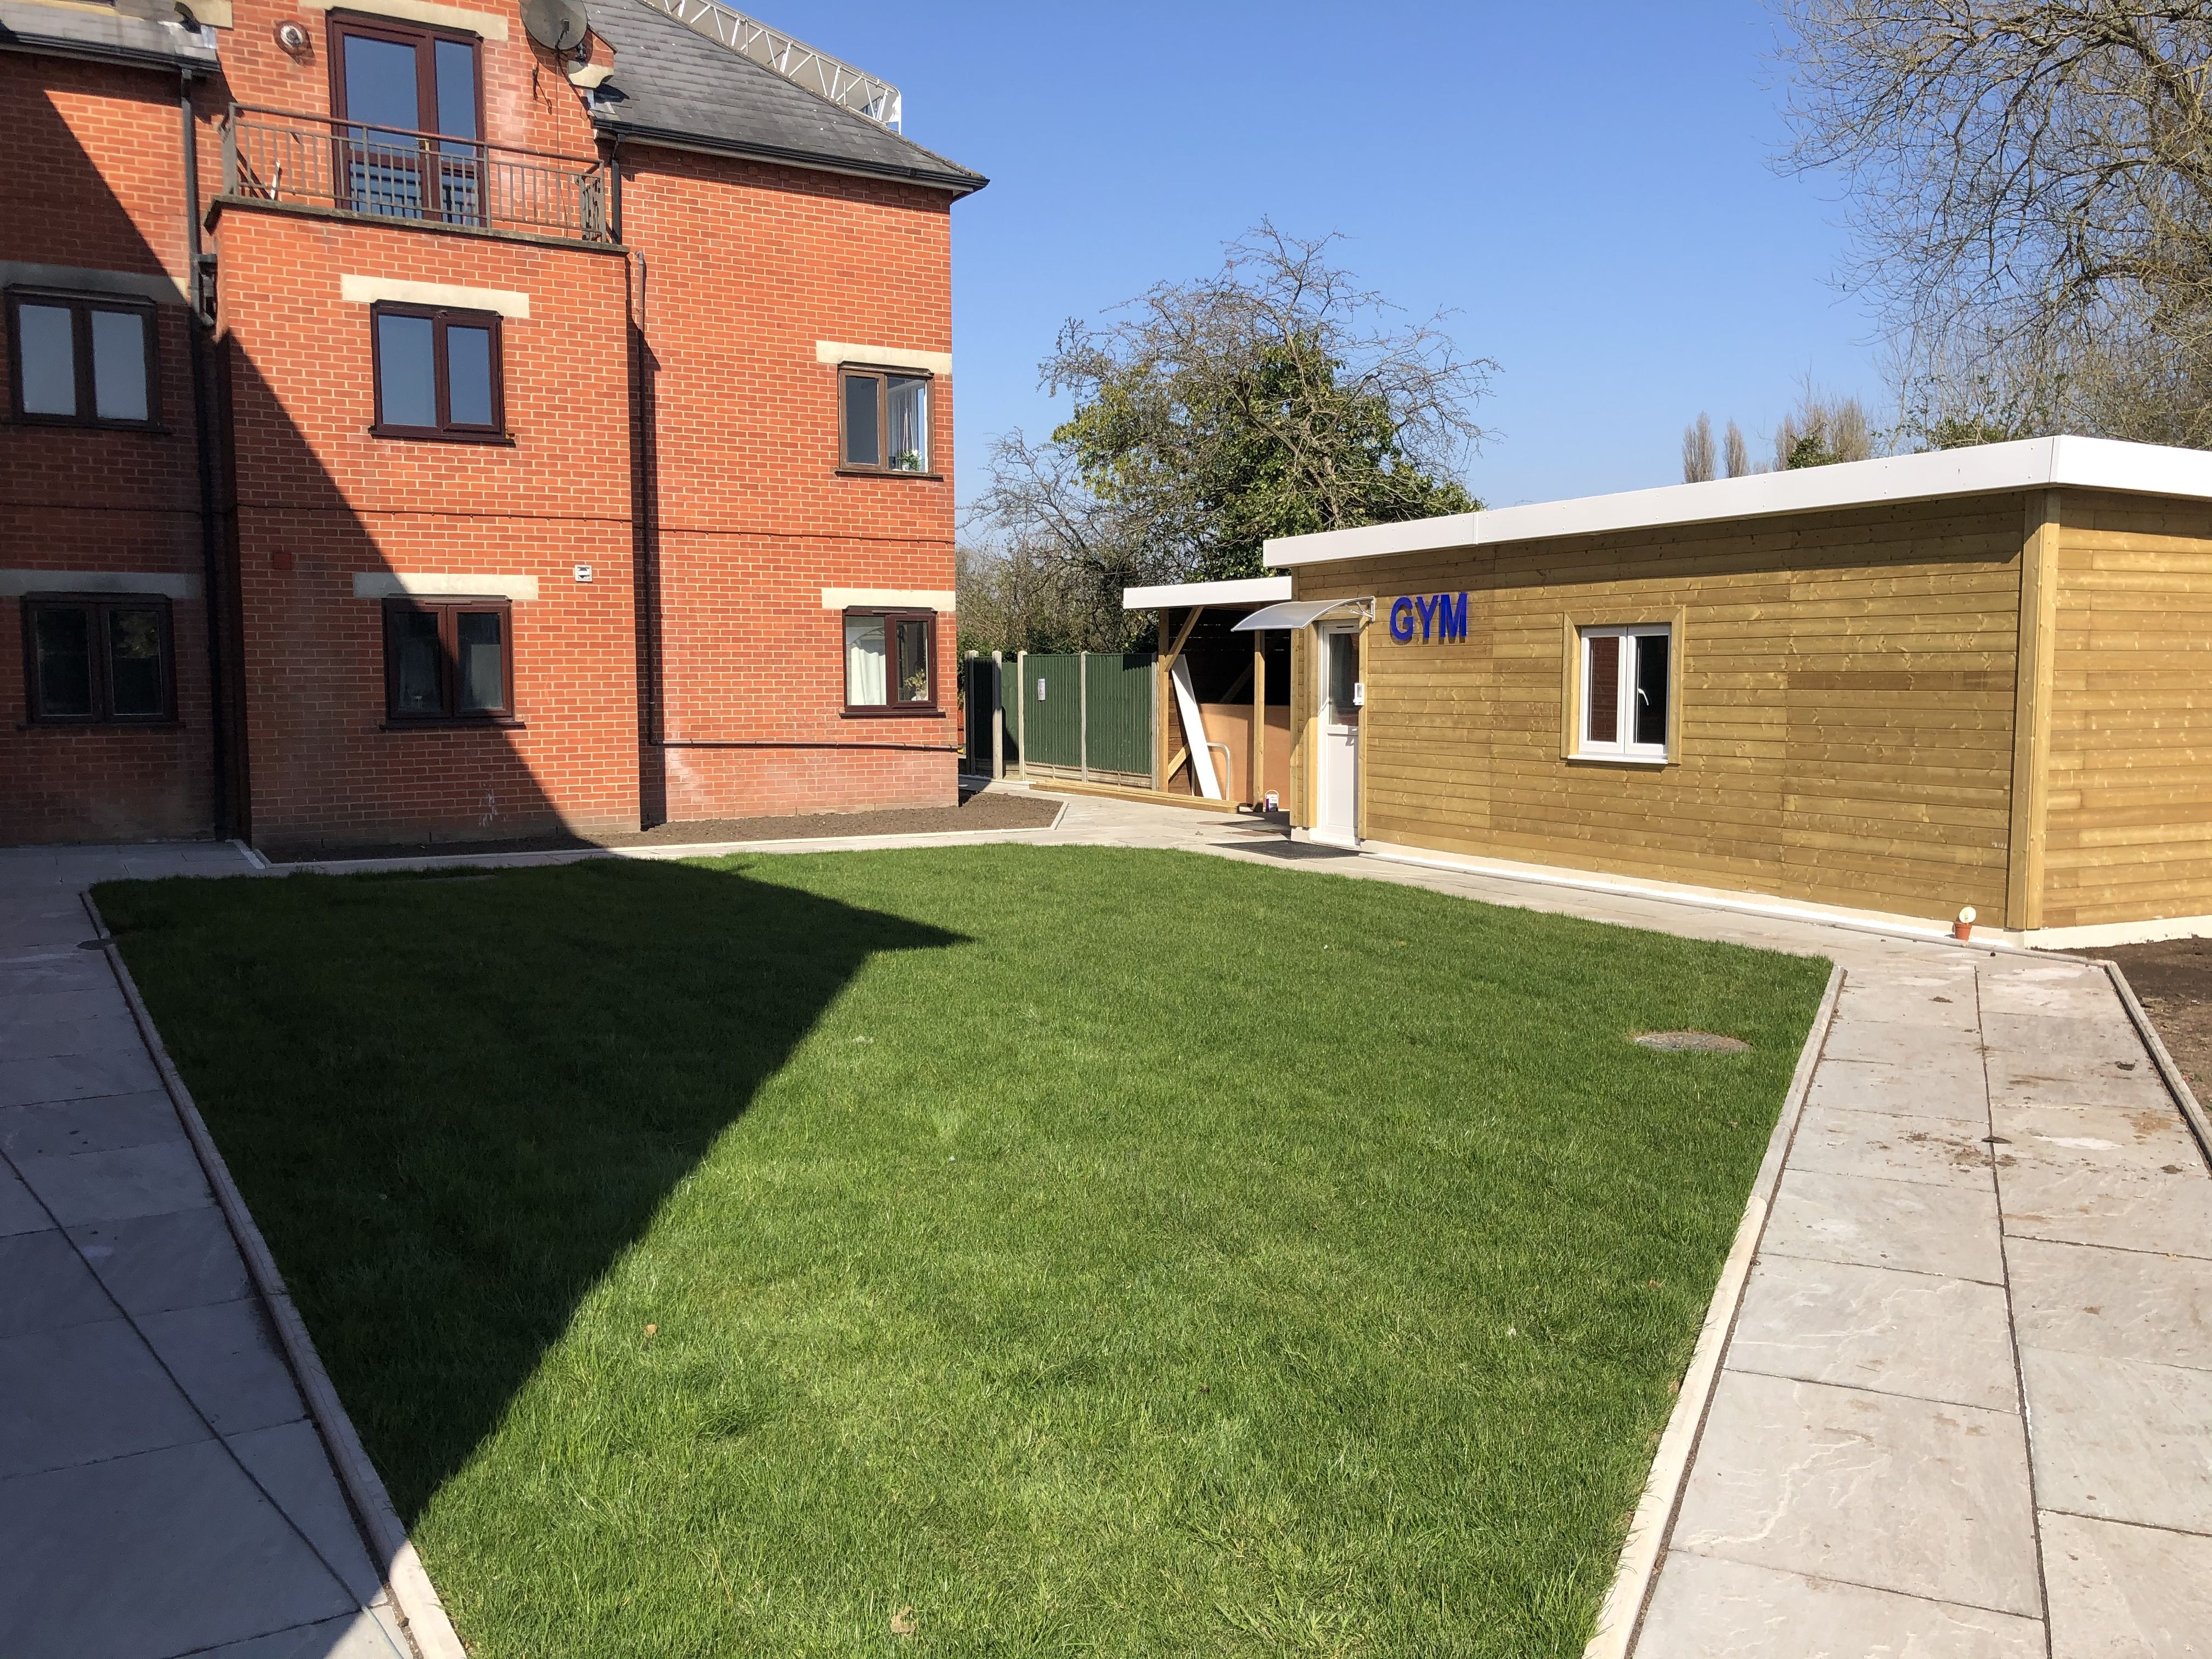 Student Accommodation Loughborough - Large outdoor area for students to meet